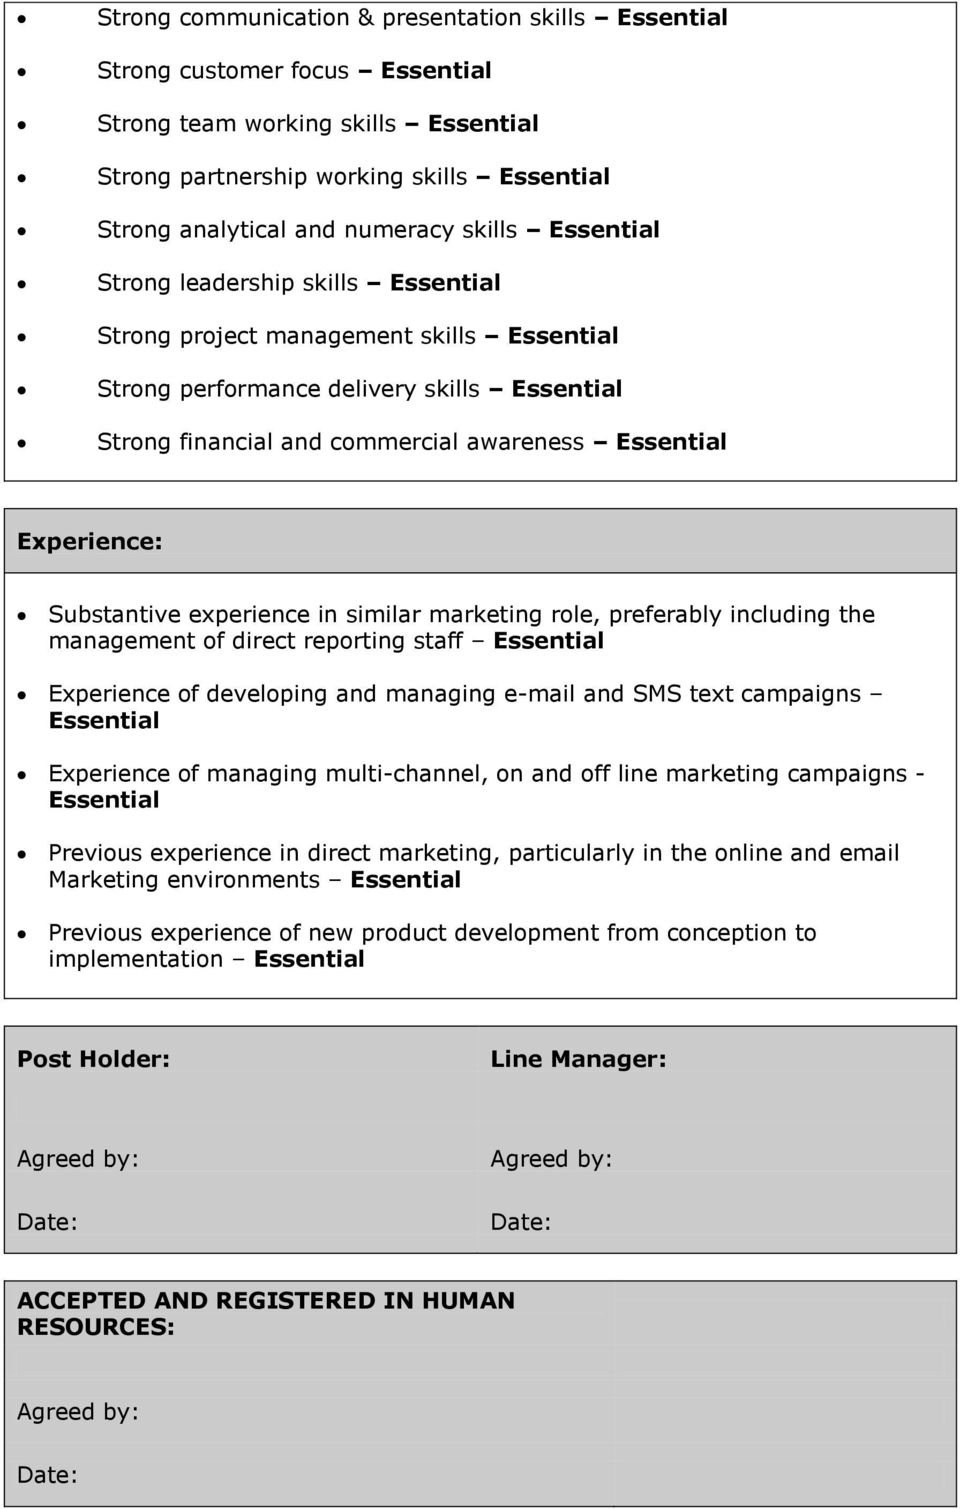 Experience: Substantive experience in similar marketing role, preferably including the management of direct reporting staff Essential Experience of developing and managing e-mail and SMS text